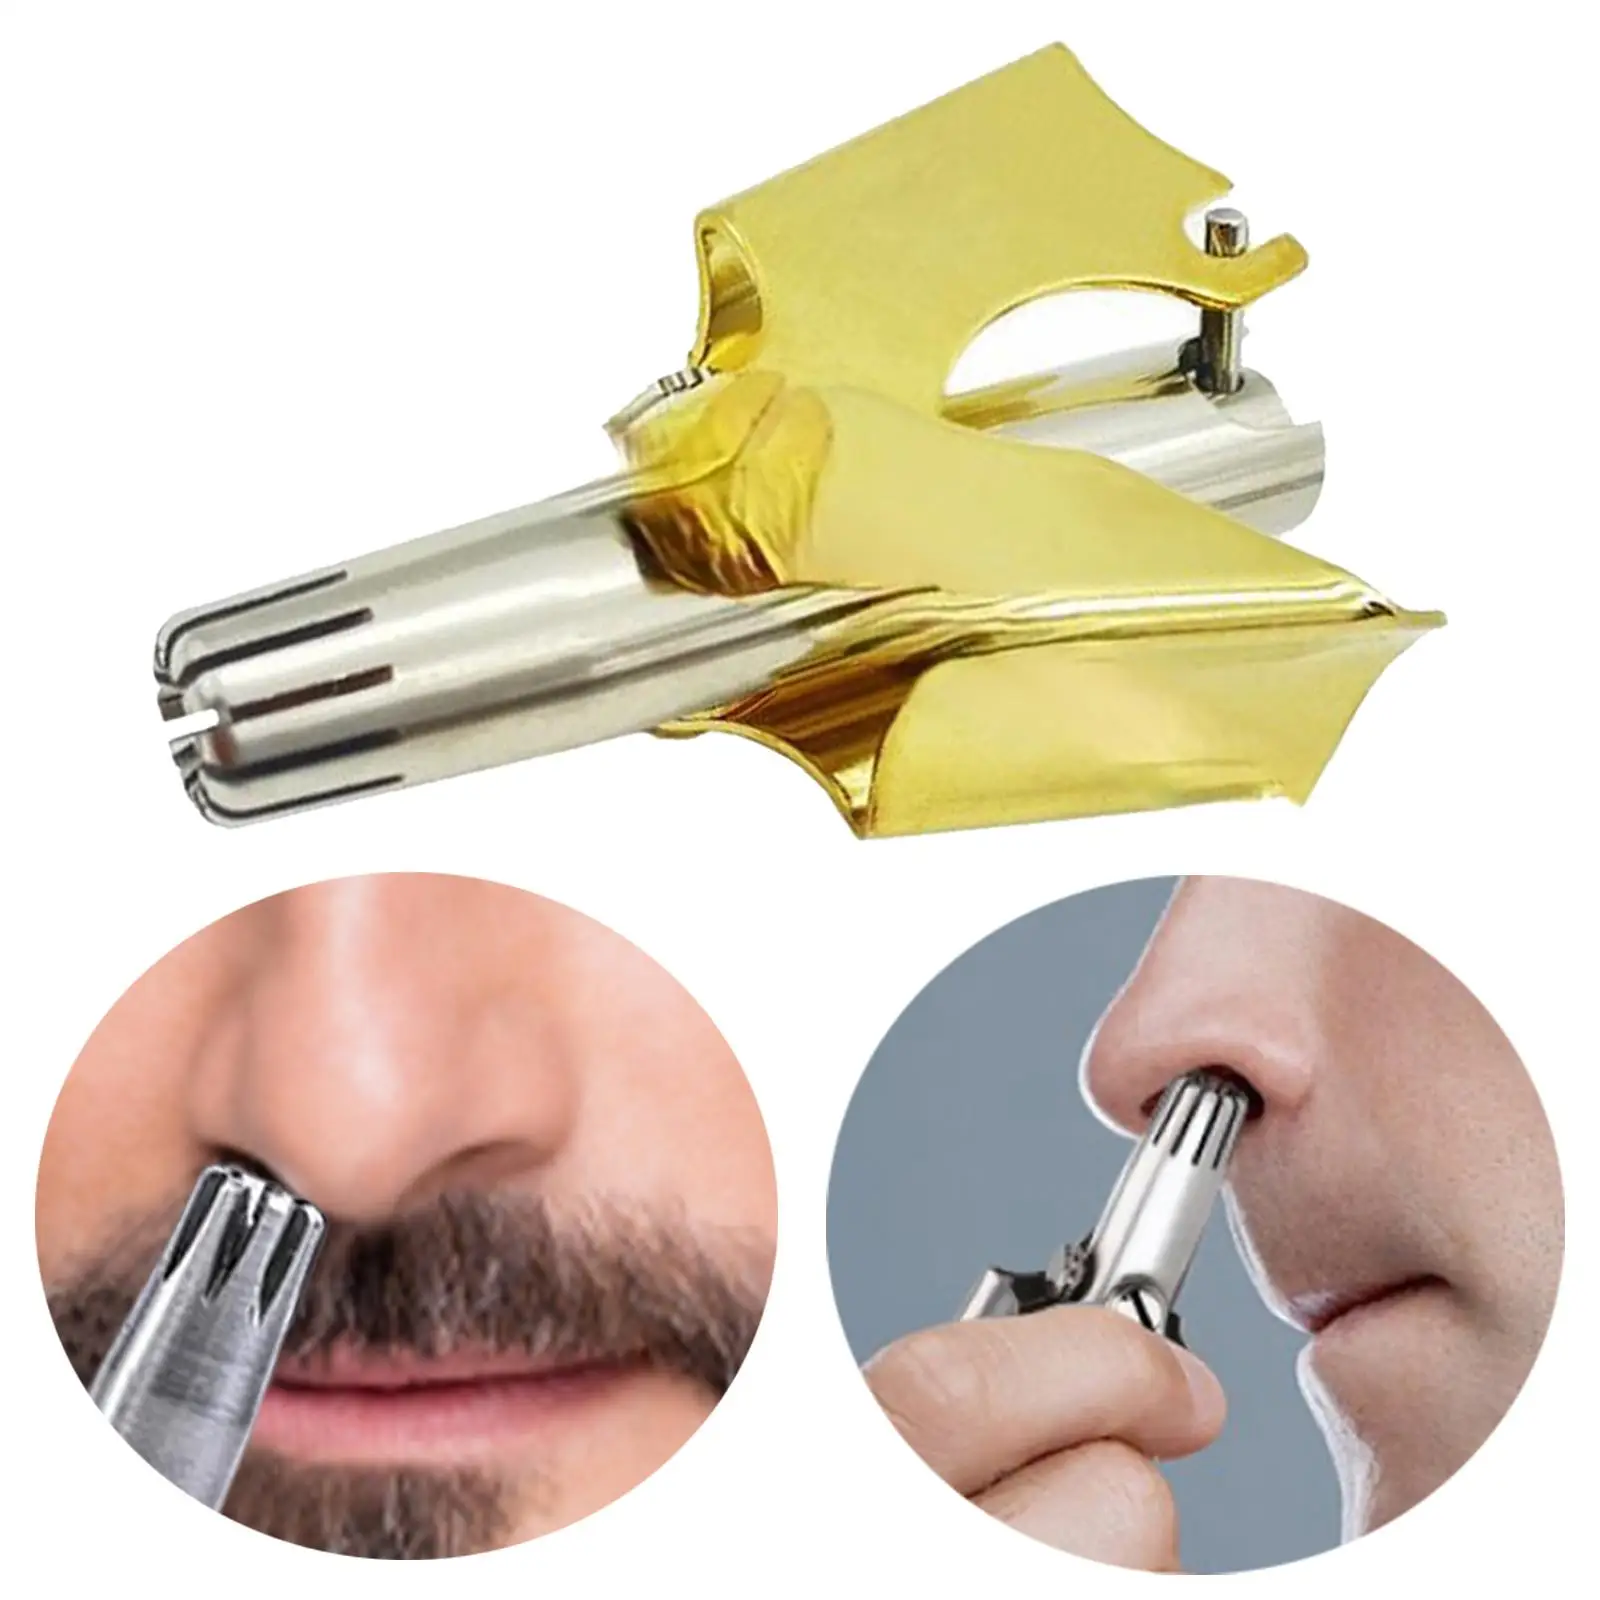 Mini Manual Nose Trimmer Washable Stainless Steel Razor Shaver No Battery for Men Low Manual Noise Ear Hair Cutter Silver Gold